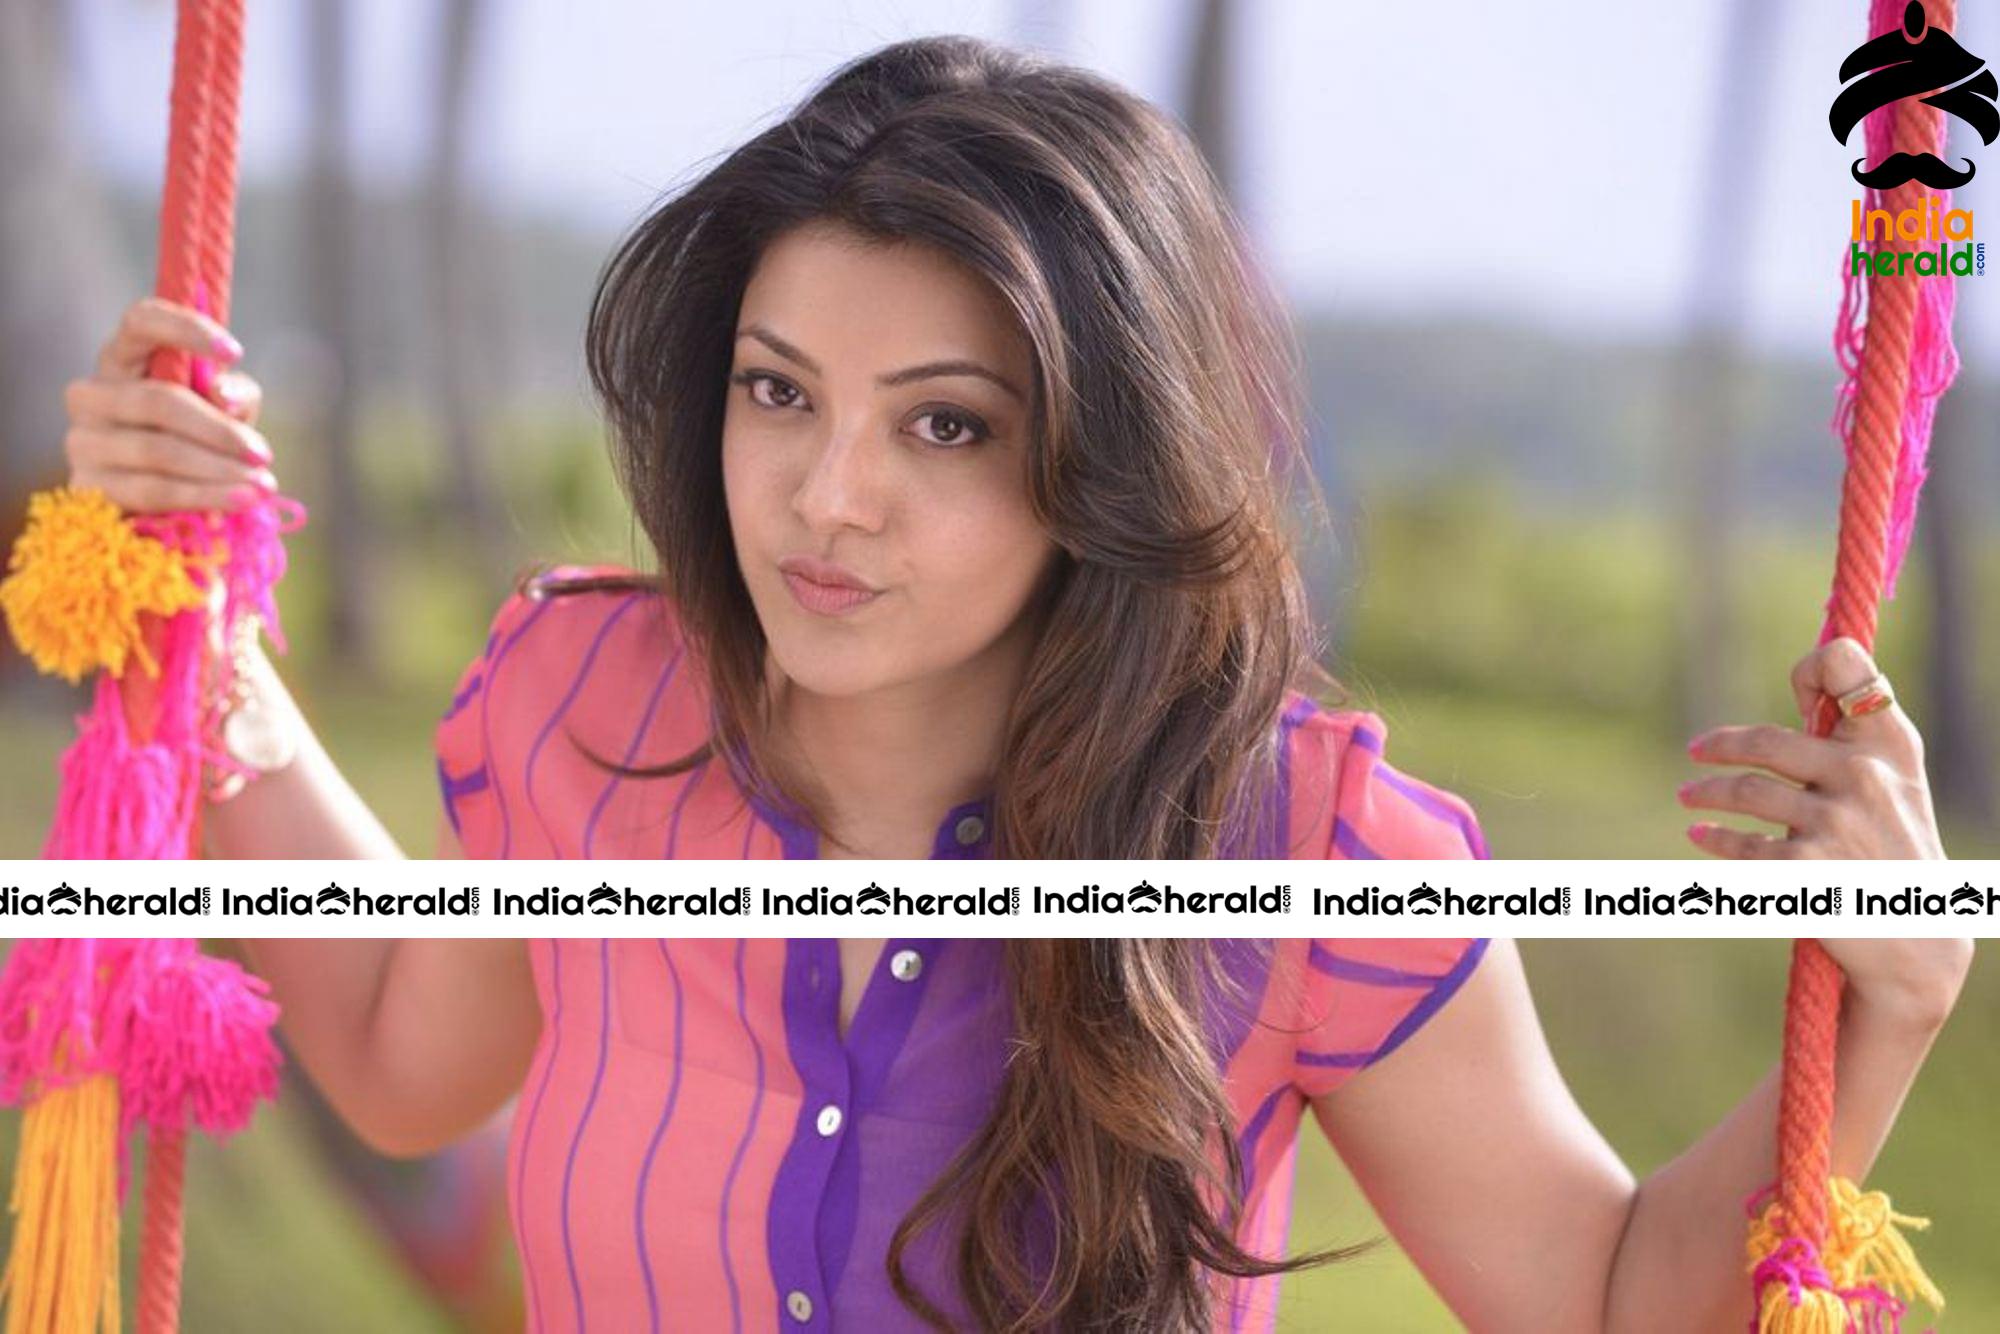 Kajal Aggarwal Looking Deliciously Hot And Tempting